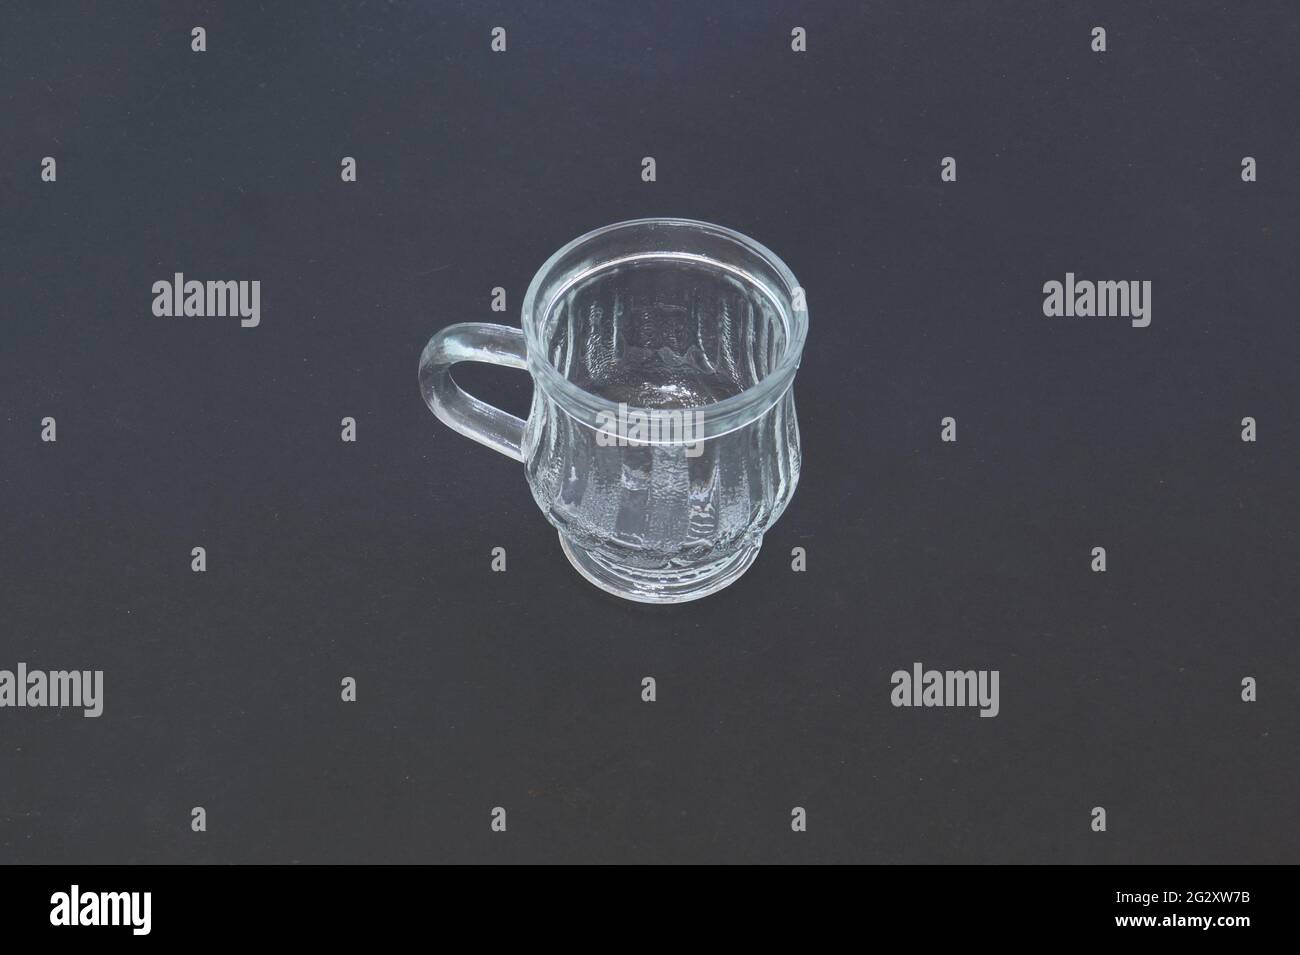 Glass cup in a dark background Stock Photo